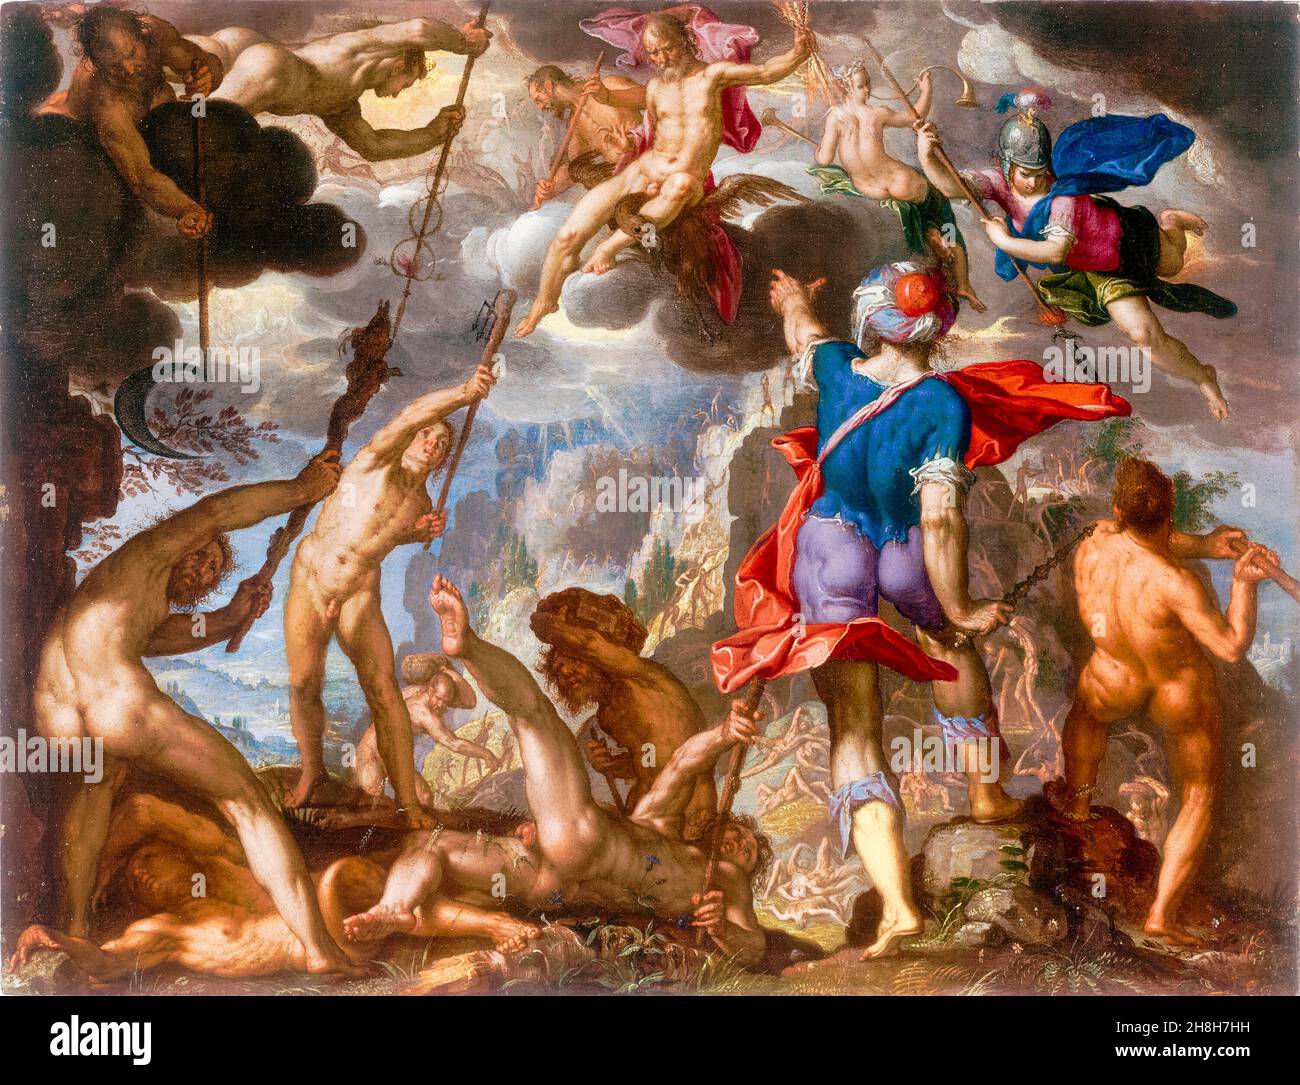 Joachim Wtewael painting,The Battle between the Gods and the Giants, 1603-1613 Stock Photo